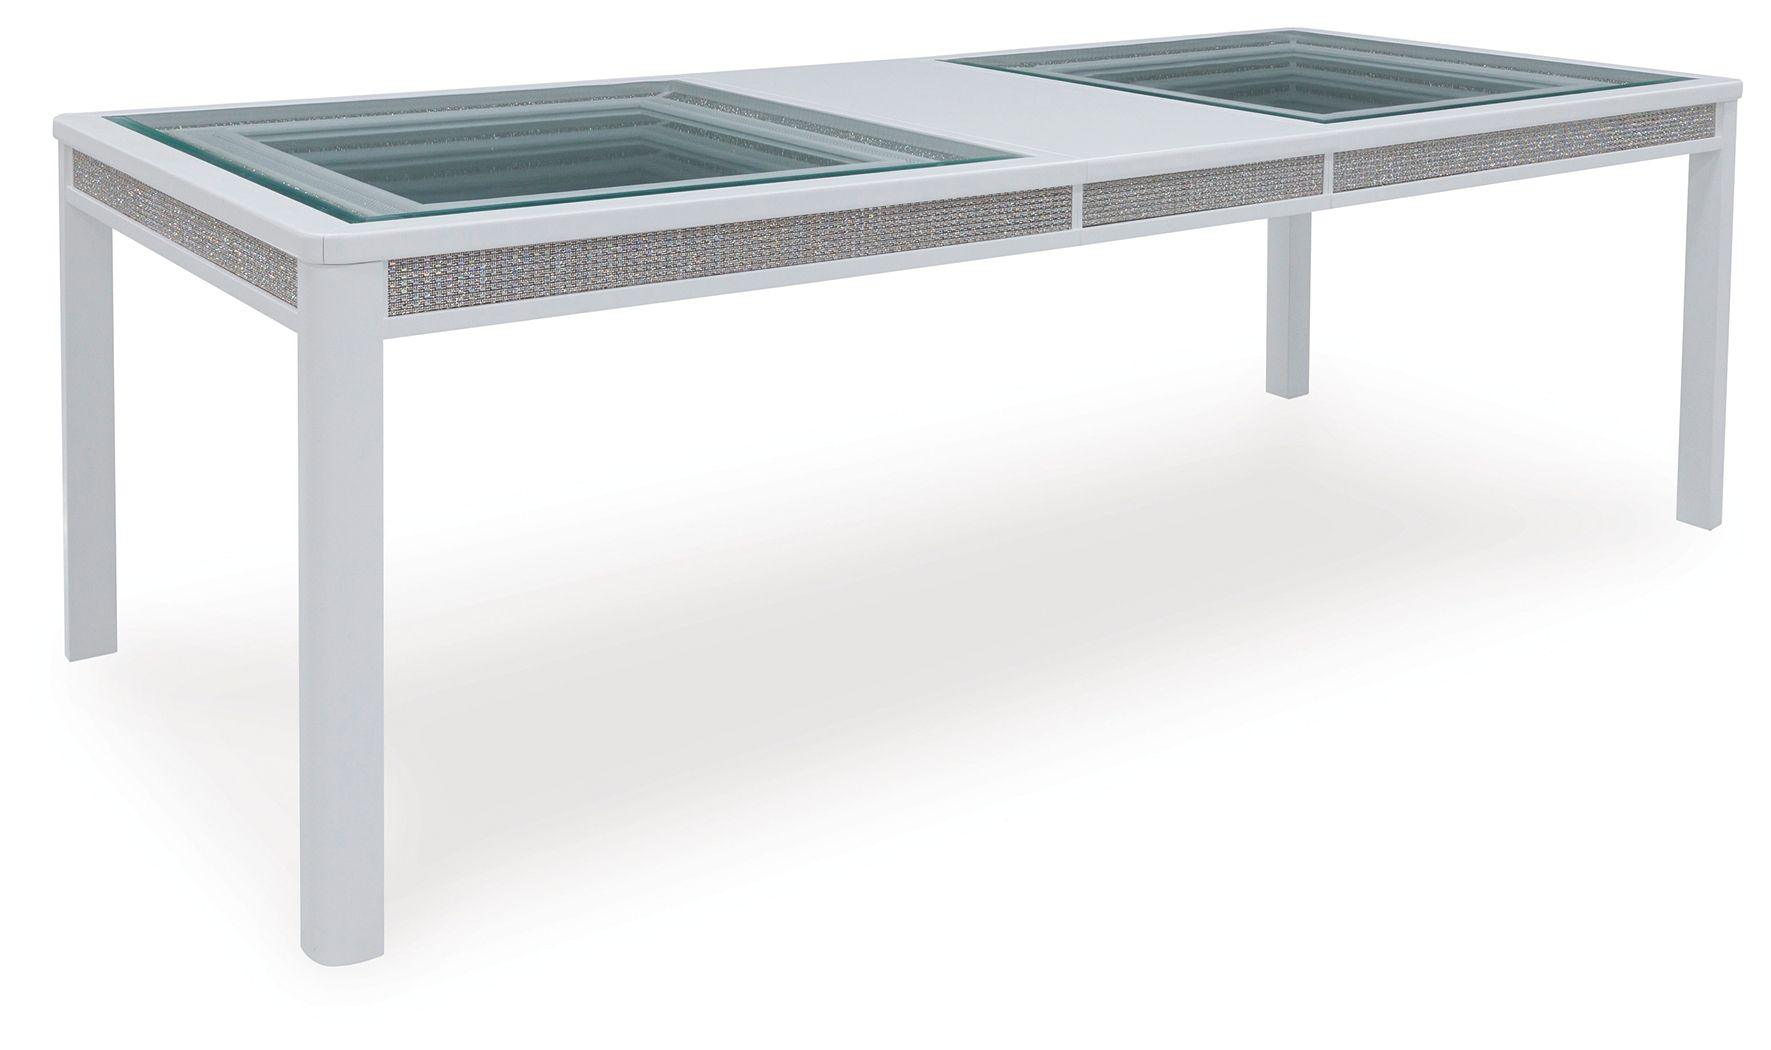 Signature Design by Ashley® - Chalanna - White - Rectangular Dining Room Extension Table - 5th Avenue Furniture